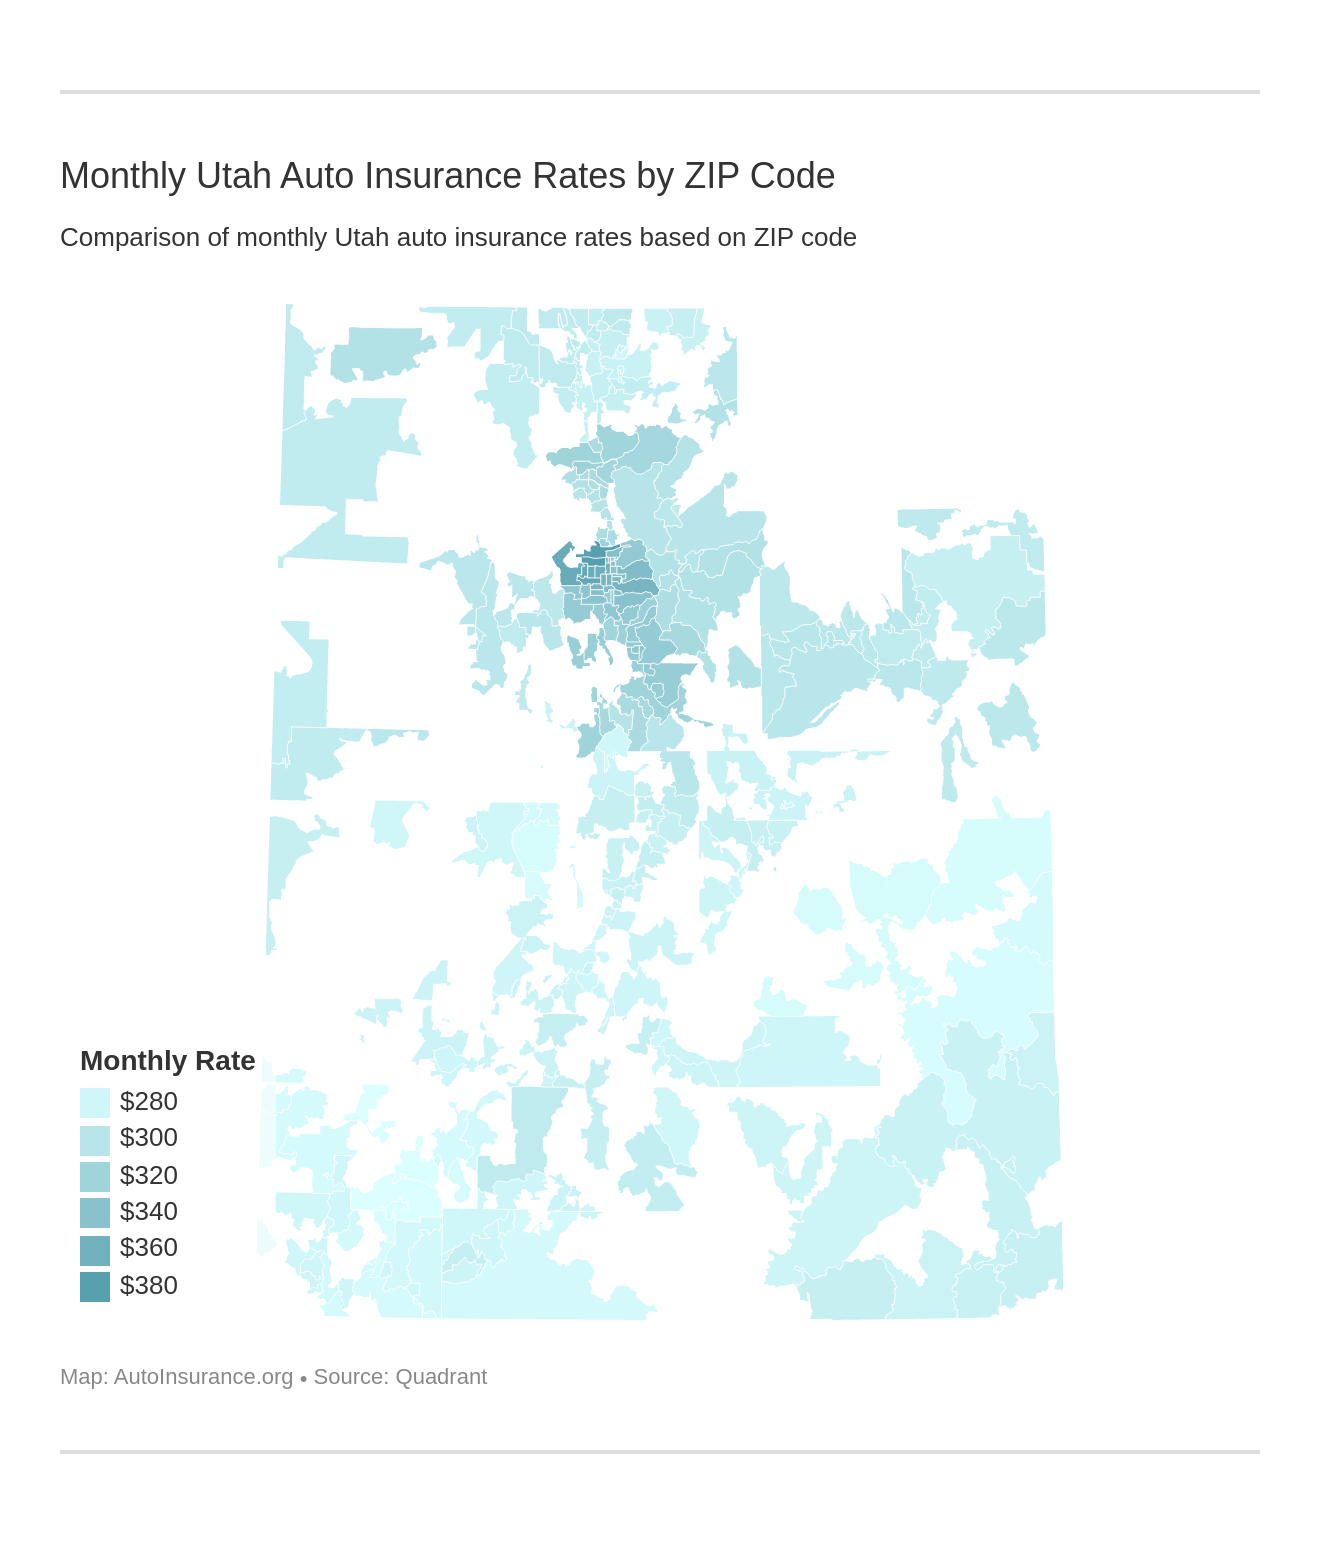 Monthly Utah Auto Insurance Rates by ZIP Code